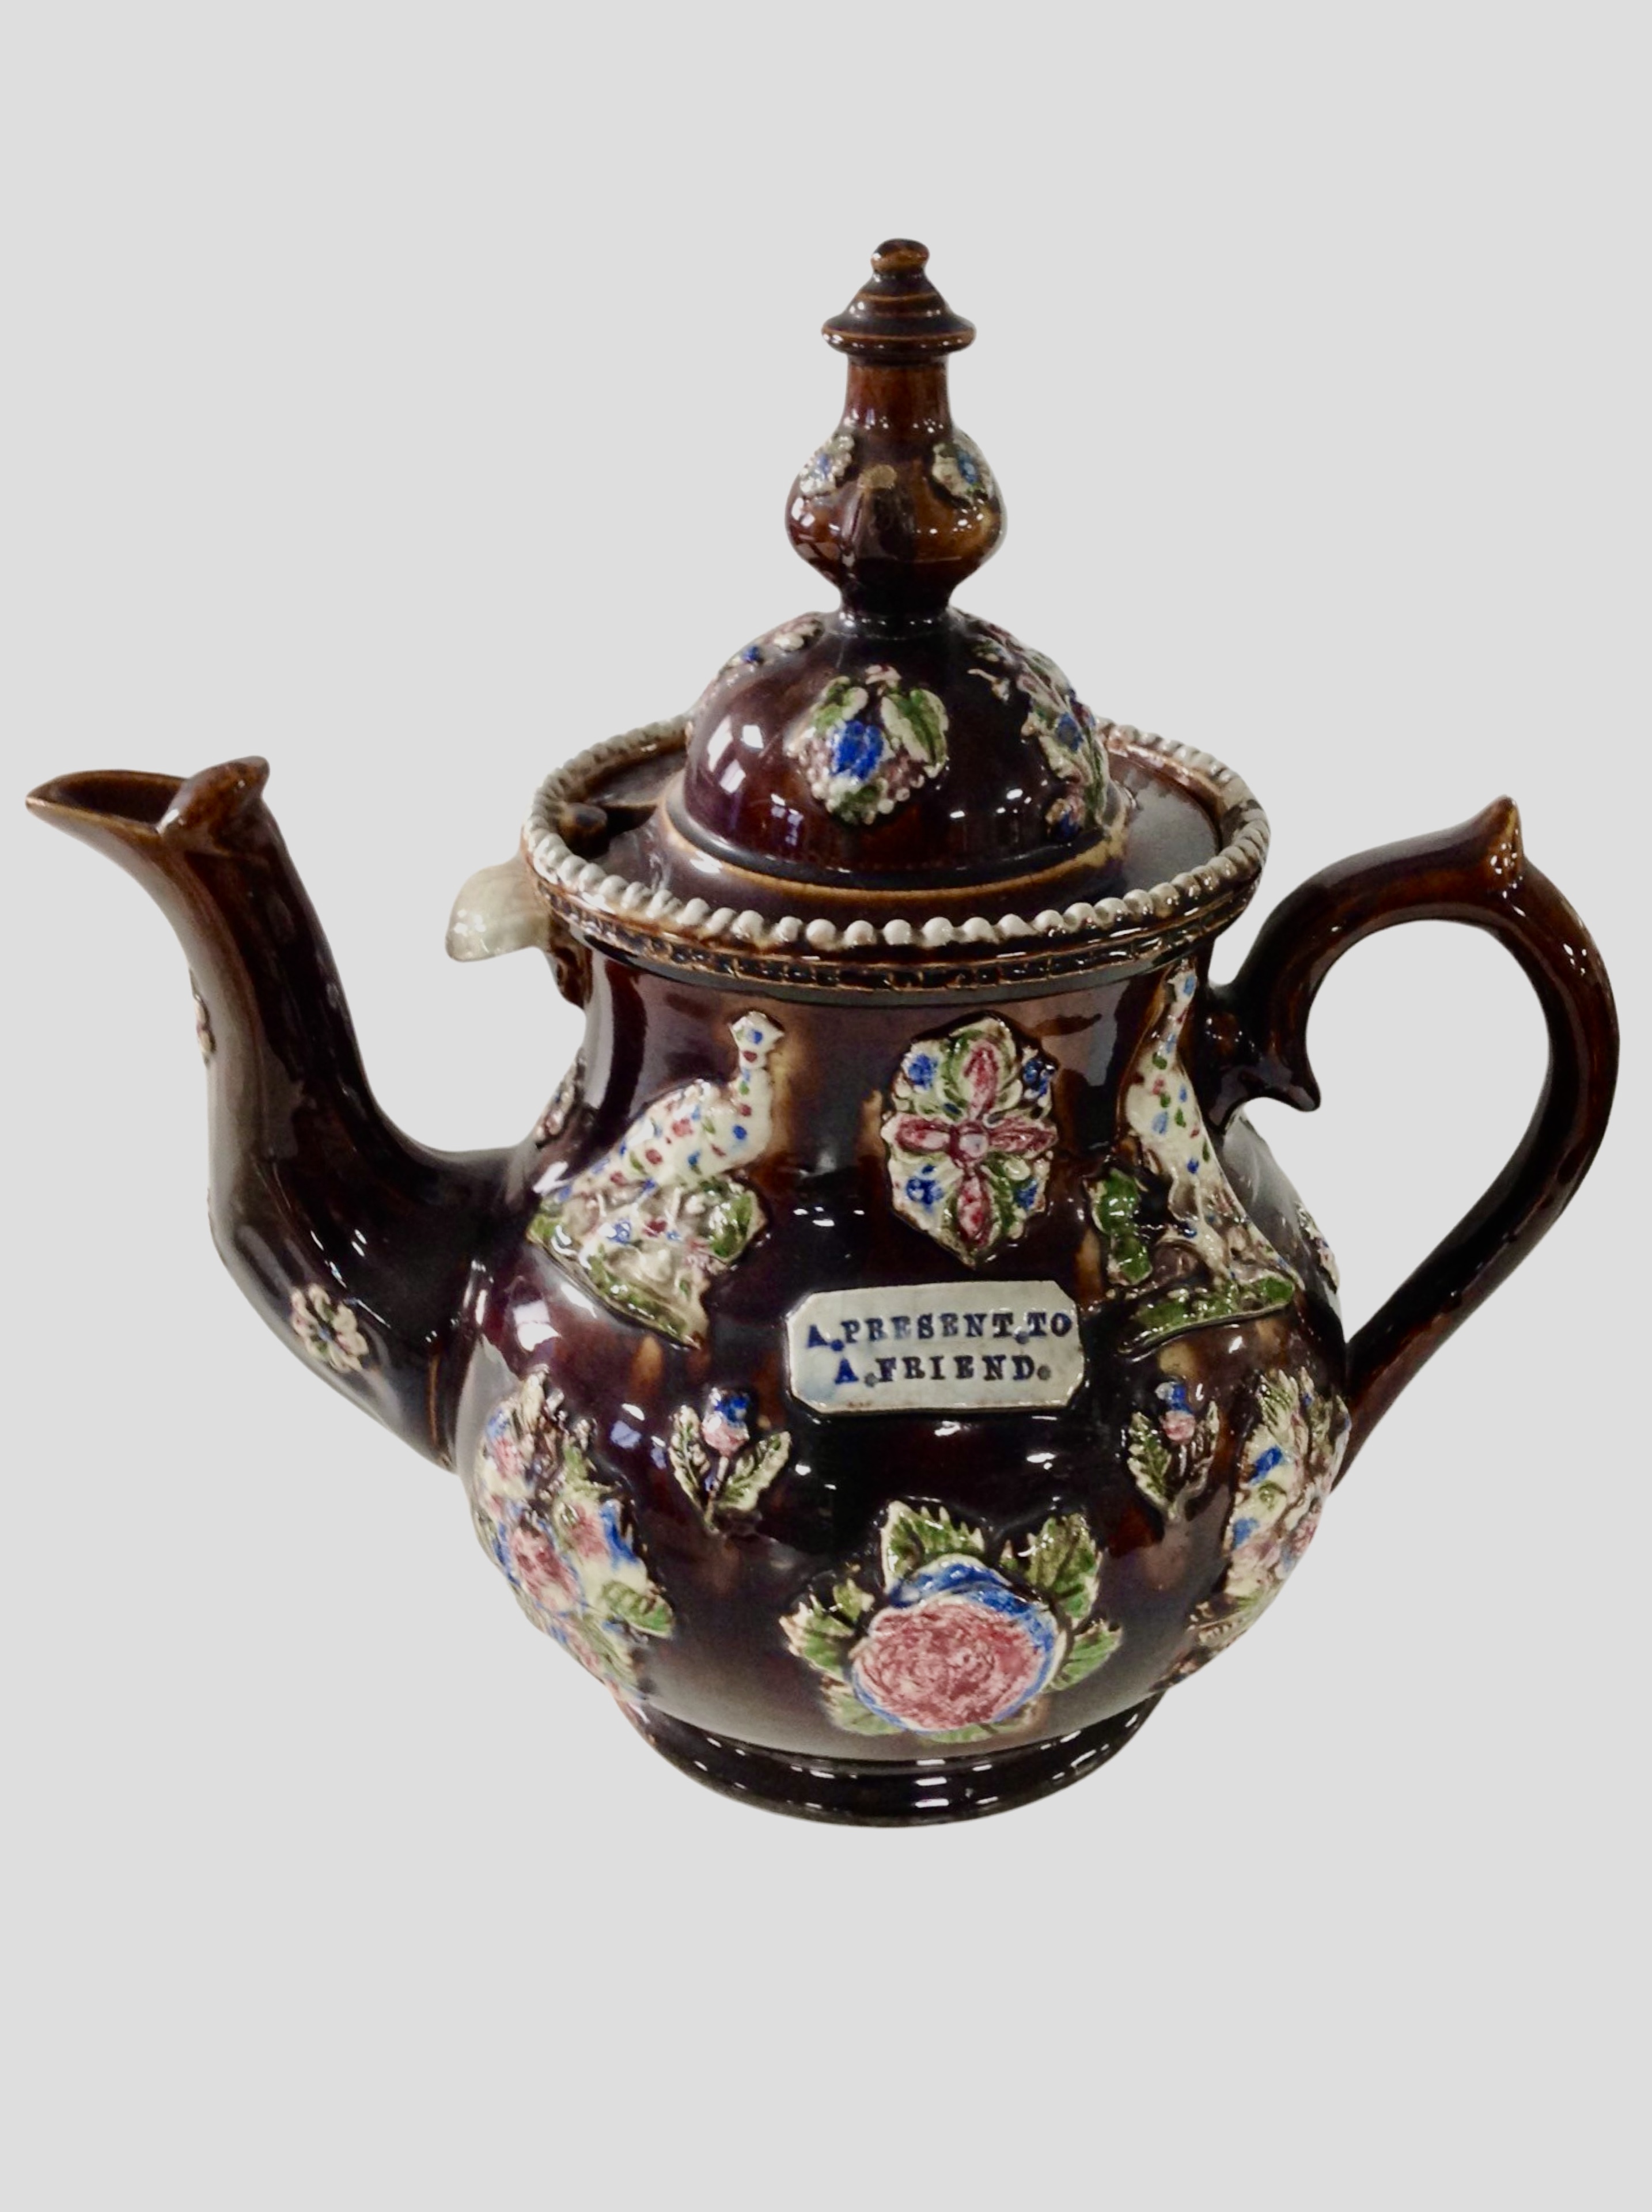 A Victorian Barge ware teapot (lid restored), height 33cm.